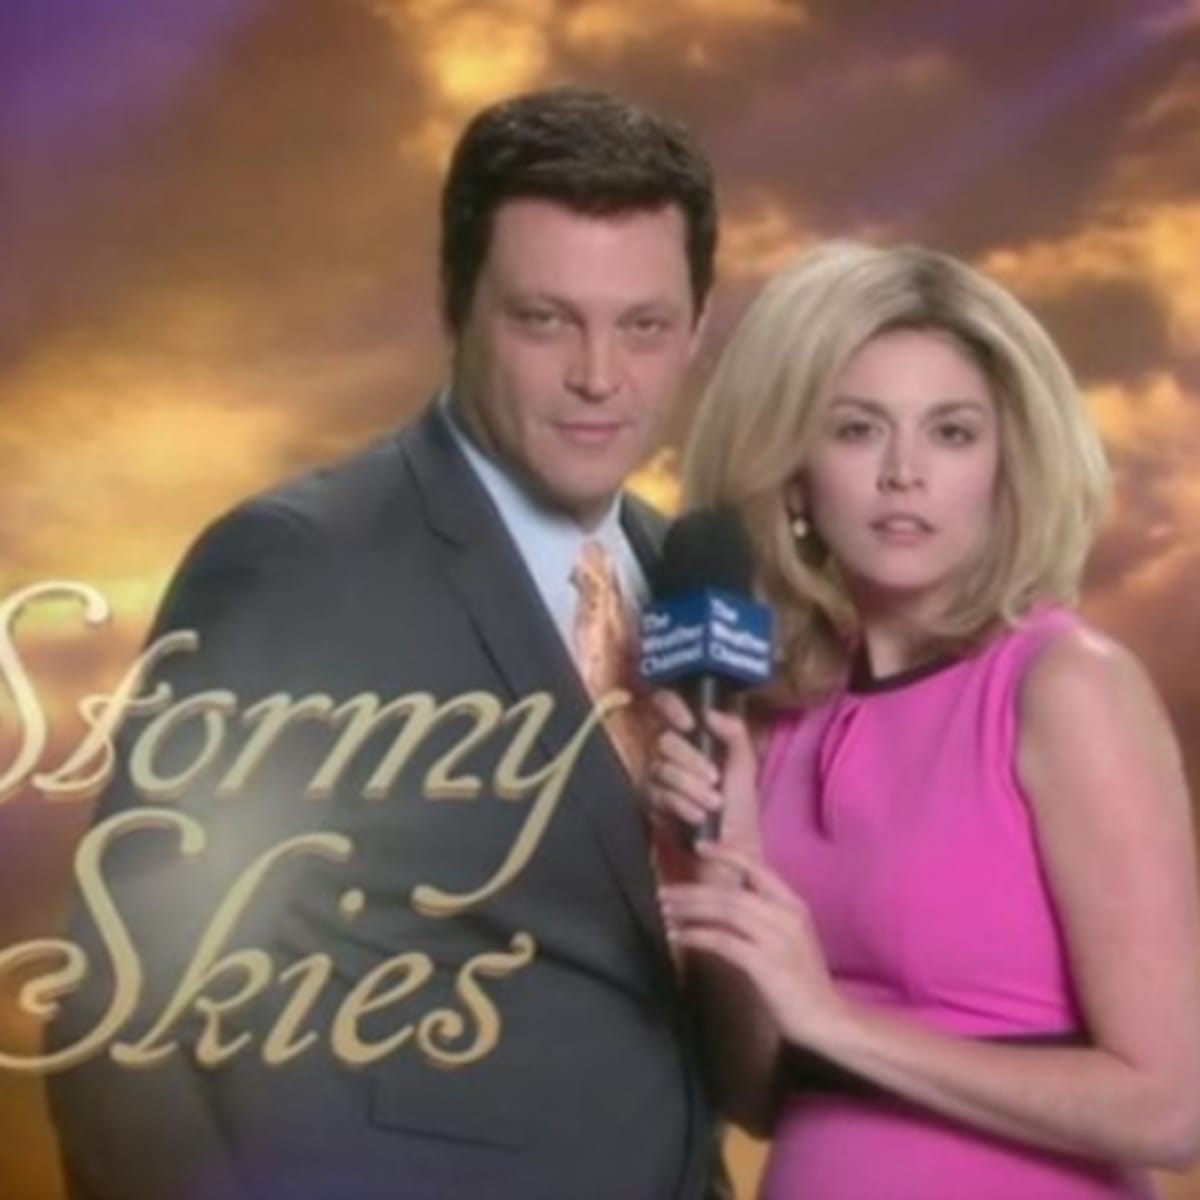 SNL Reveals What a Soap Opera on The Weather Channel Would Look